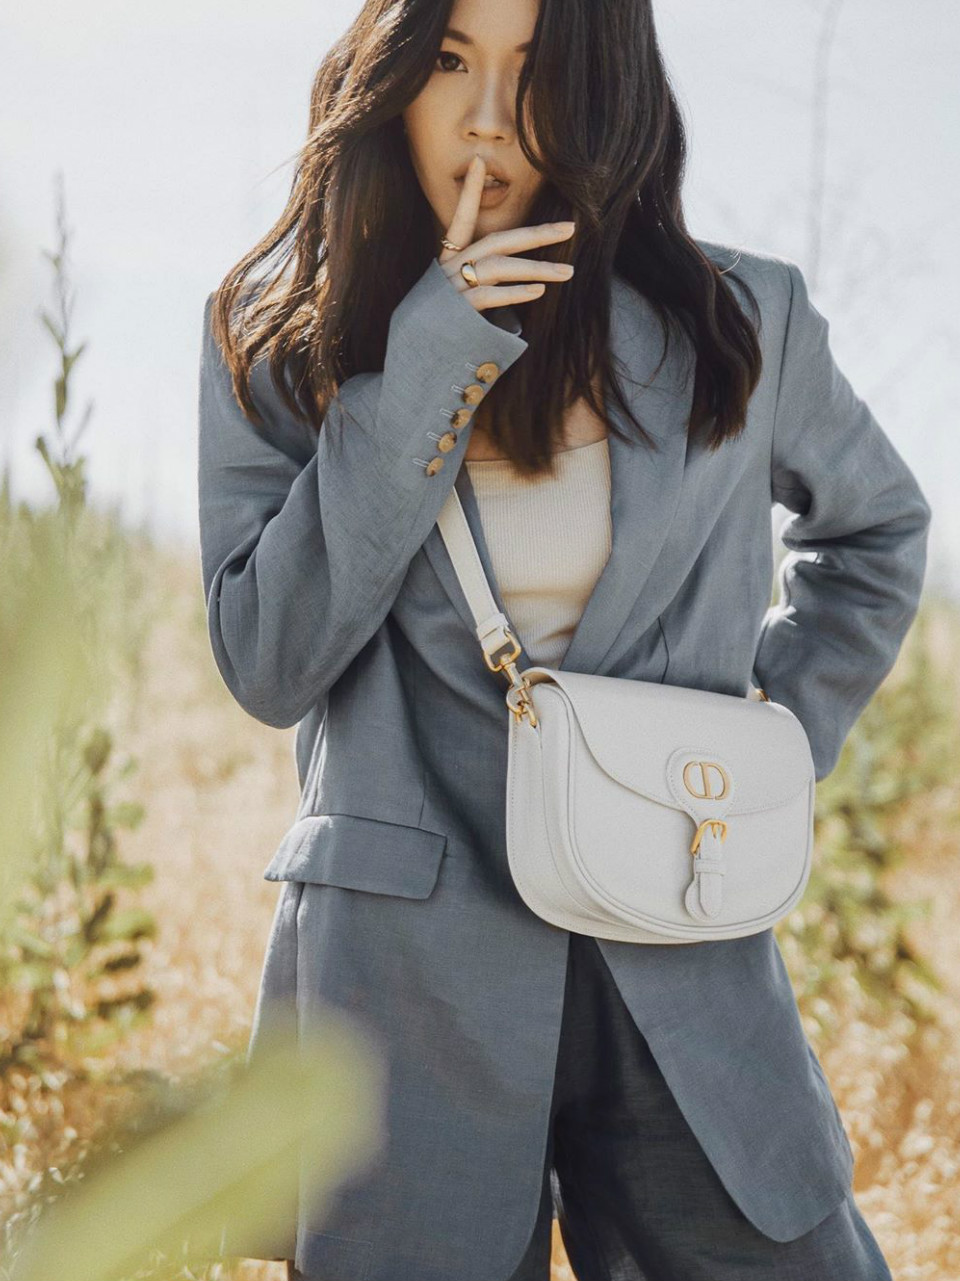 Jenny Tsang On The Secrets Behind Her Effortless Style